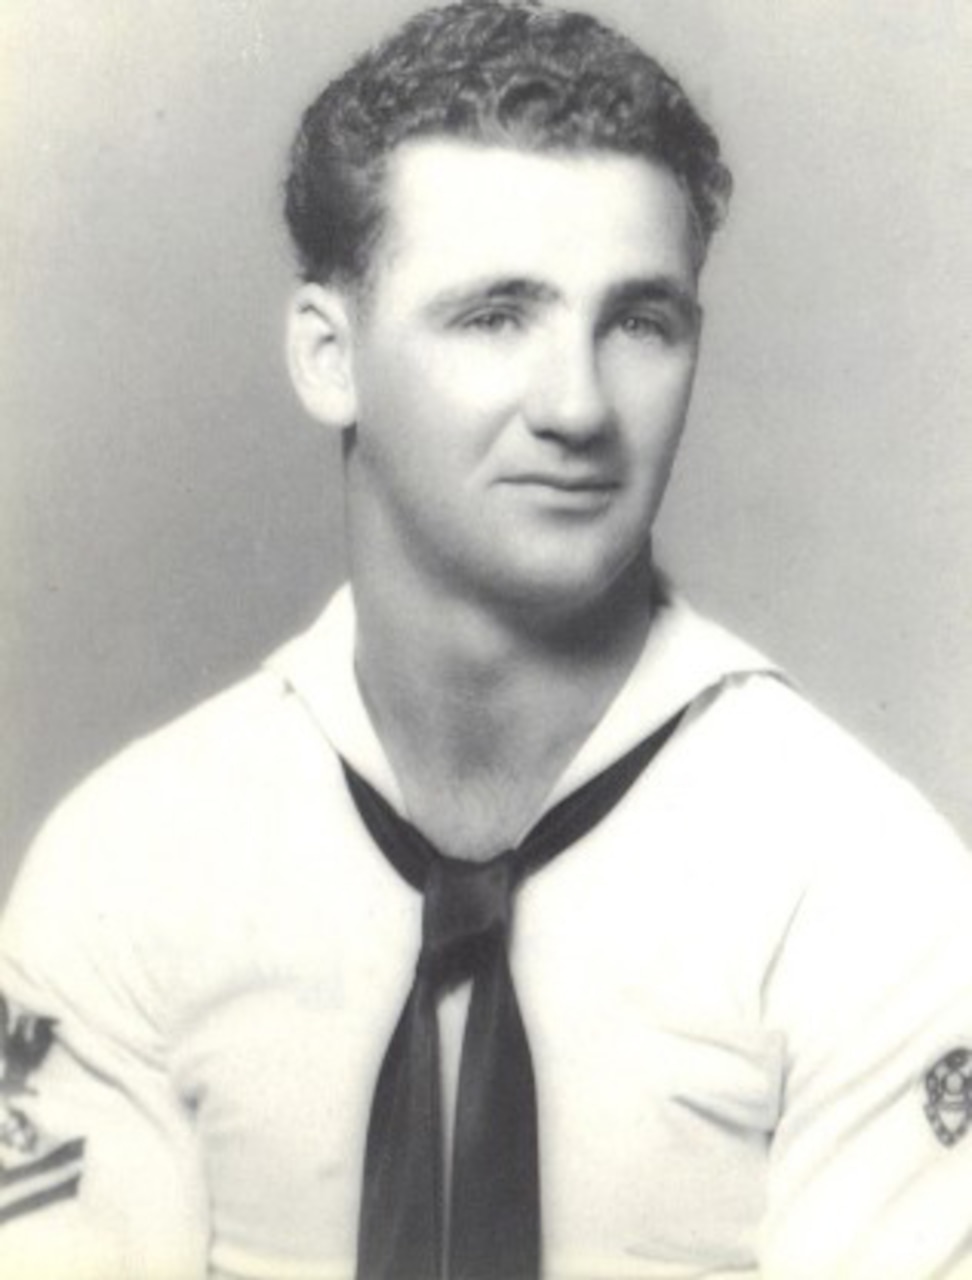 A sailor wearing a white dress uniform poses for the camera.